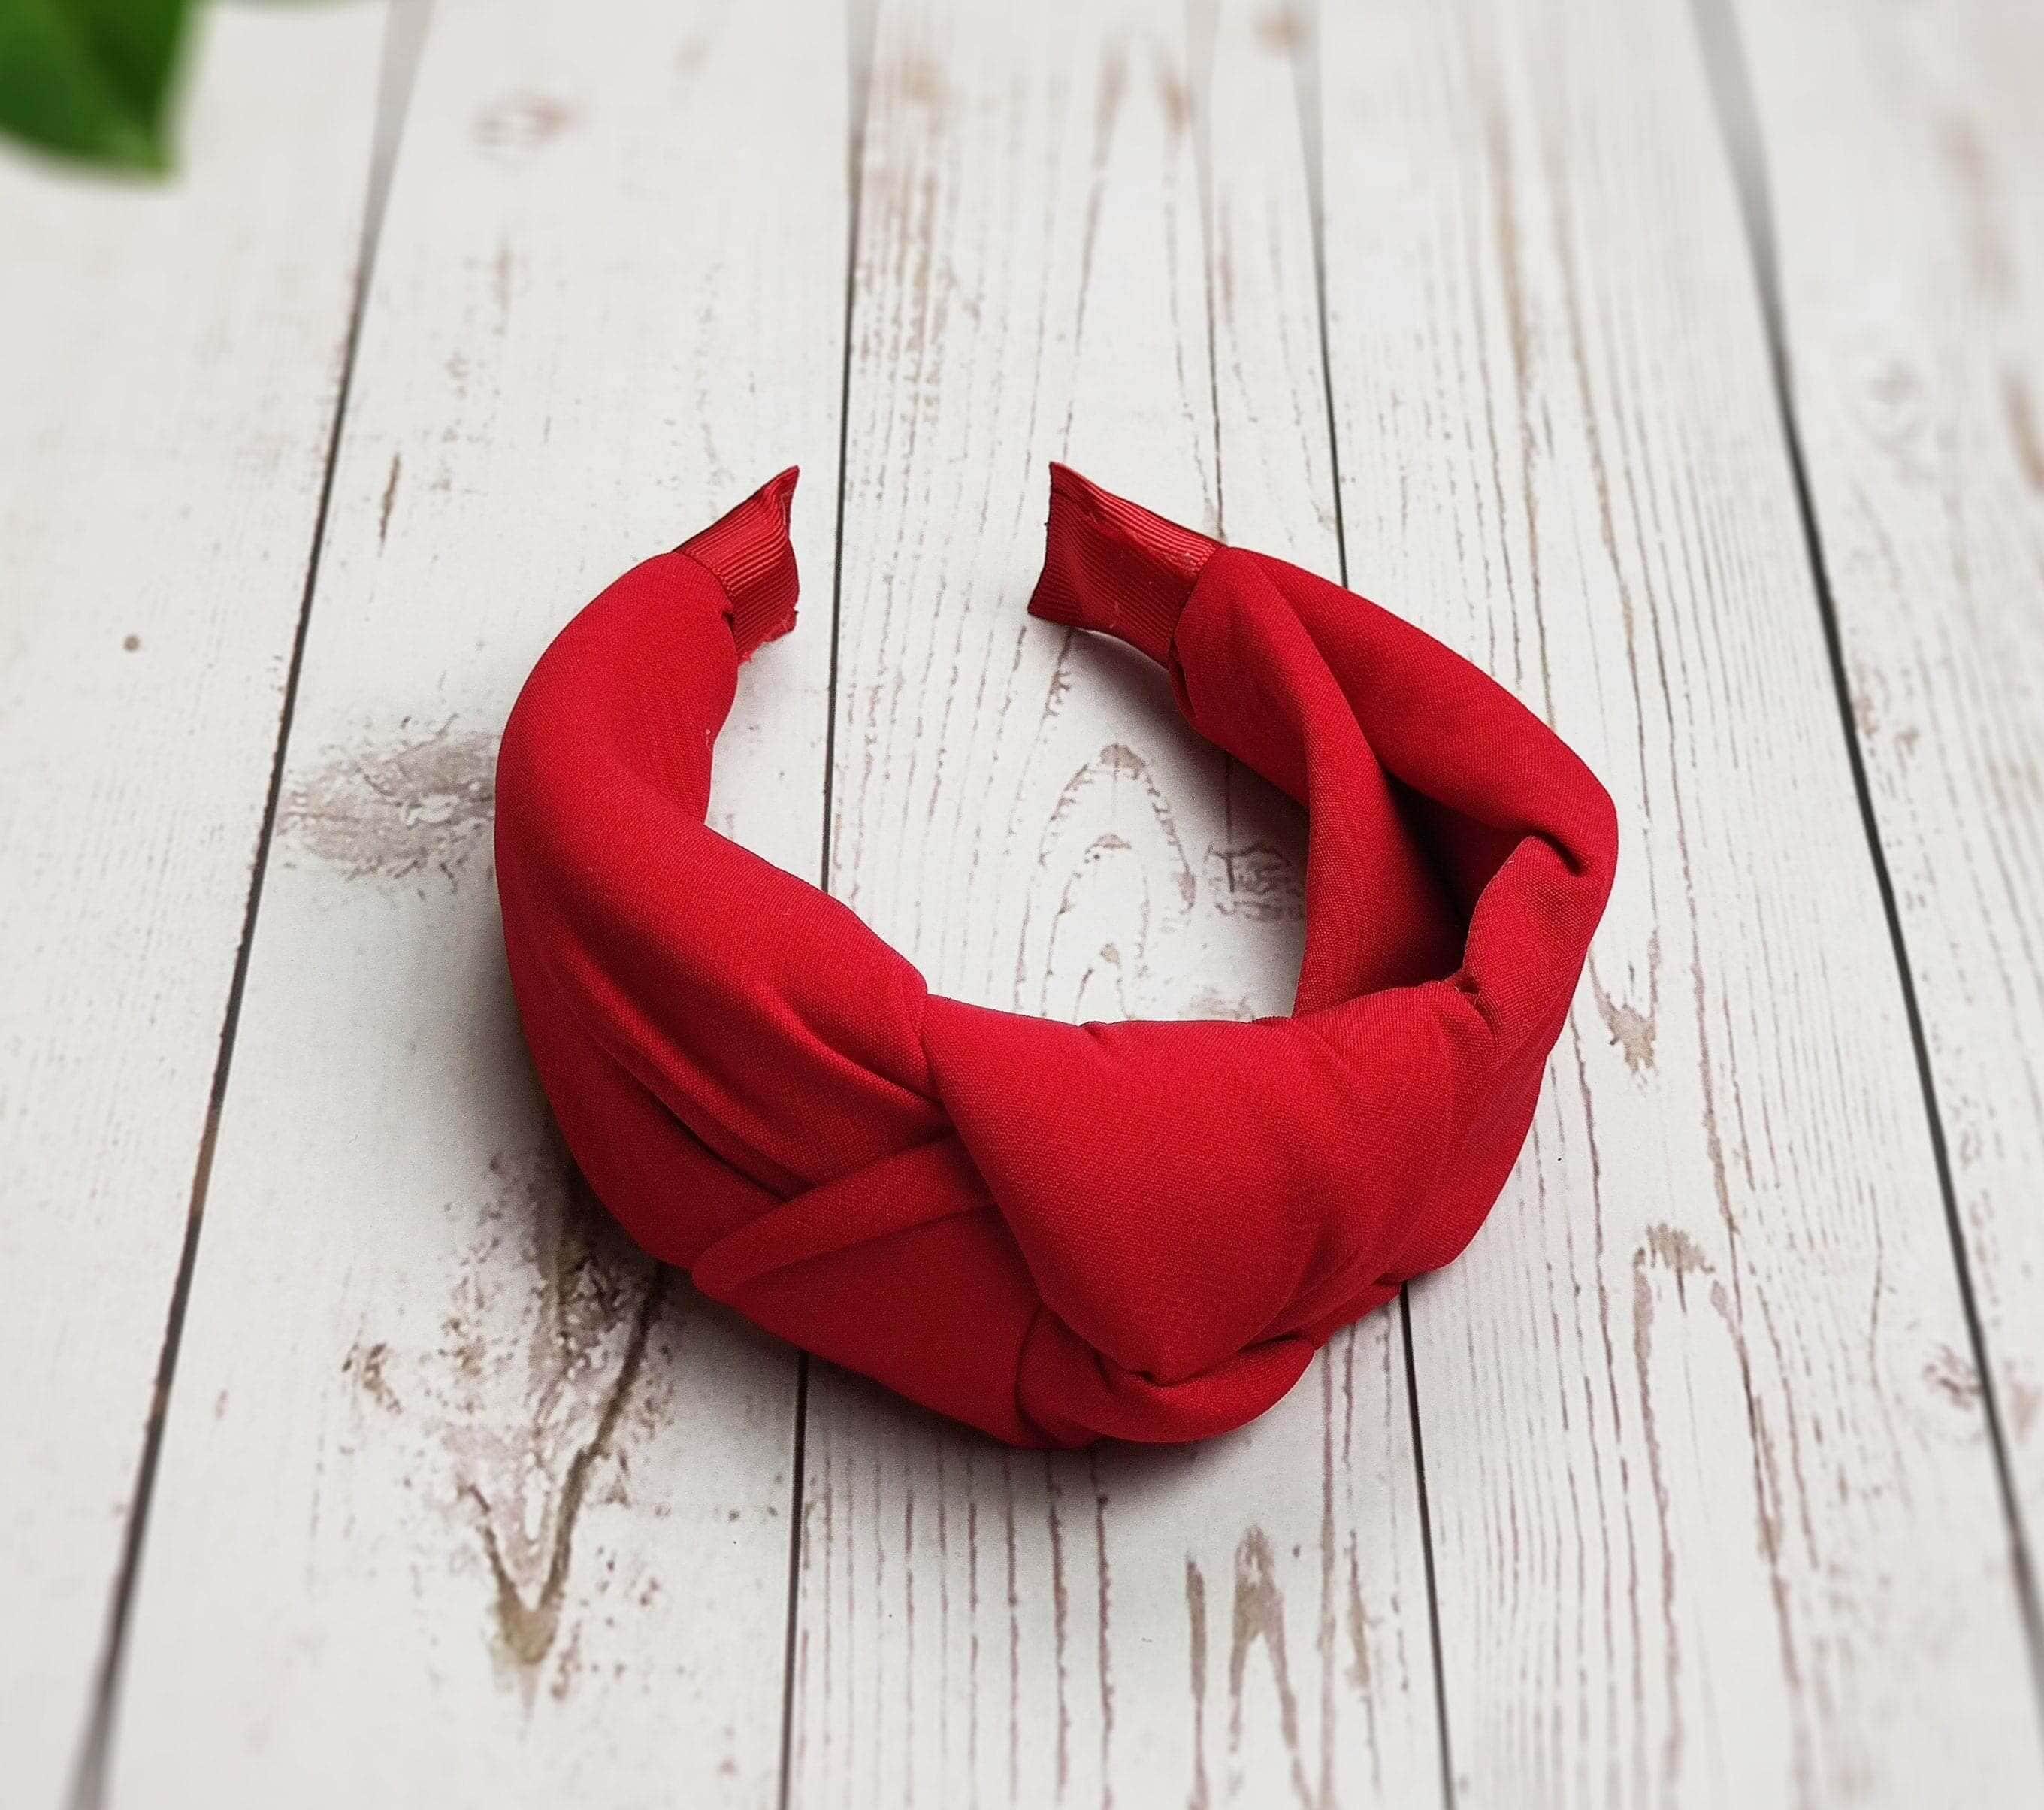 Charming Stylish Red Viscose Crepe Headband for Women - Elegant Wide Hairband available at Moyoni Design